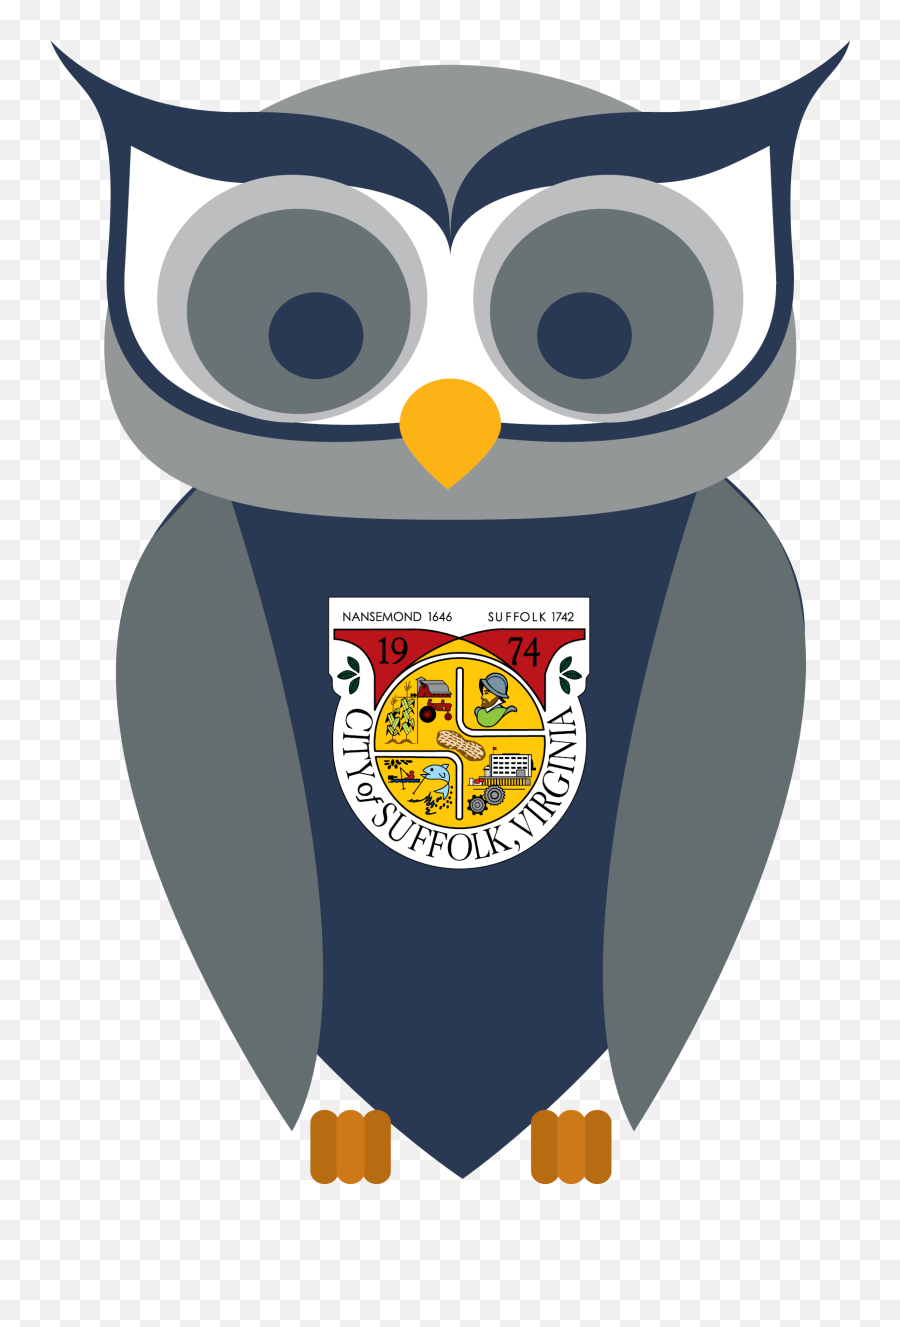 Library - Locationservicescoordinator Job Details Tab Emoji,Emotions Related To Owls